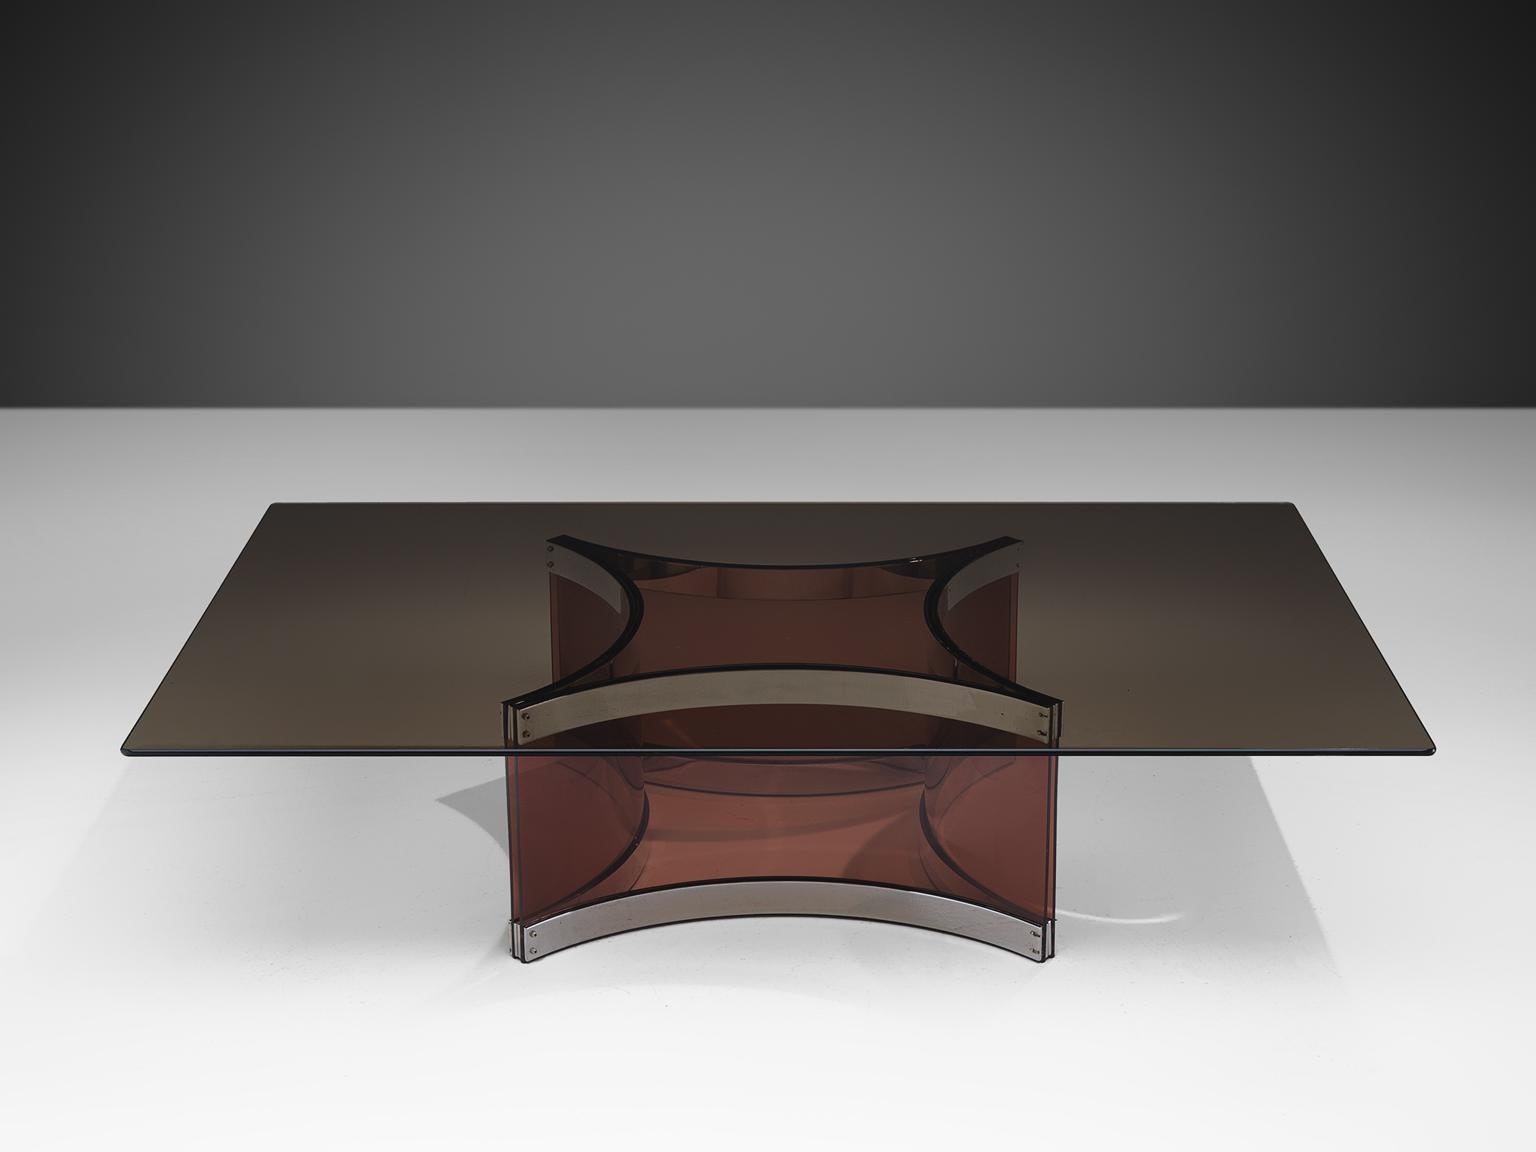 Alessandro Albrizzi, coffee table, glass, Italy, 1960s.

This cocktail table has a bent, cross-shaped base. The top and base were made in two tones of smoked glass. The curved glass segments of the base have chrome metal edges. These elegant details